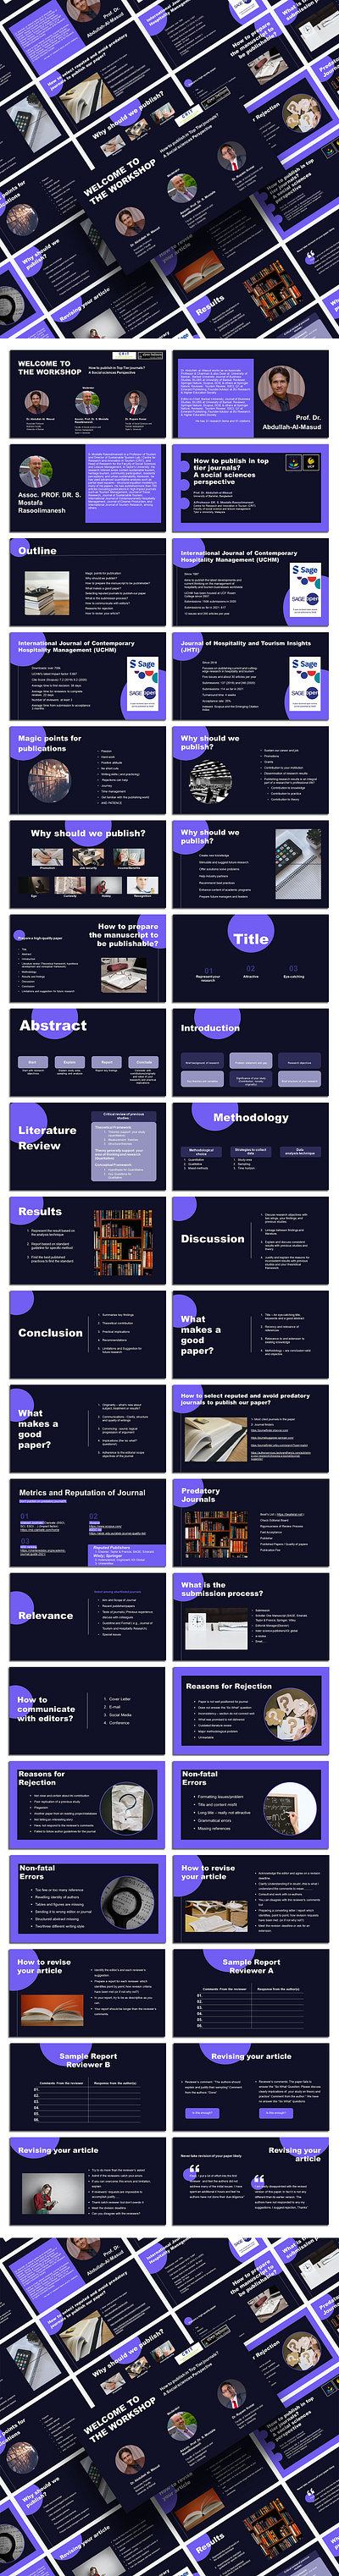 POWERPOINT PRESENTATION DESIGN OF AN EDUCATIONAL WORKSHOP graphic design layout design pitch deck powerpoint presentation